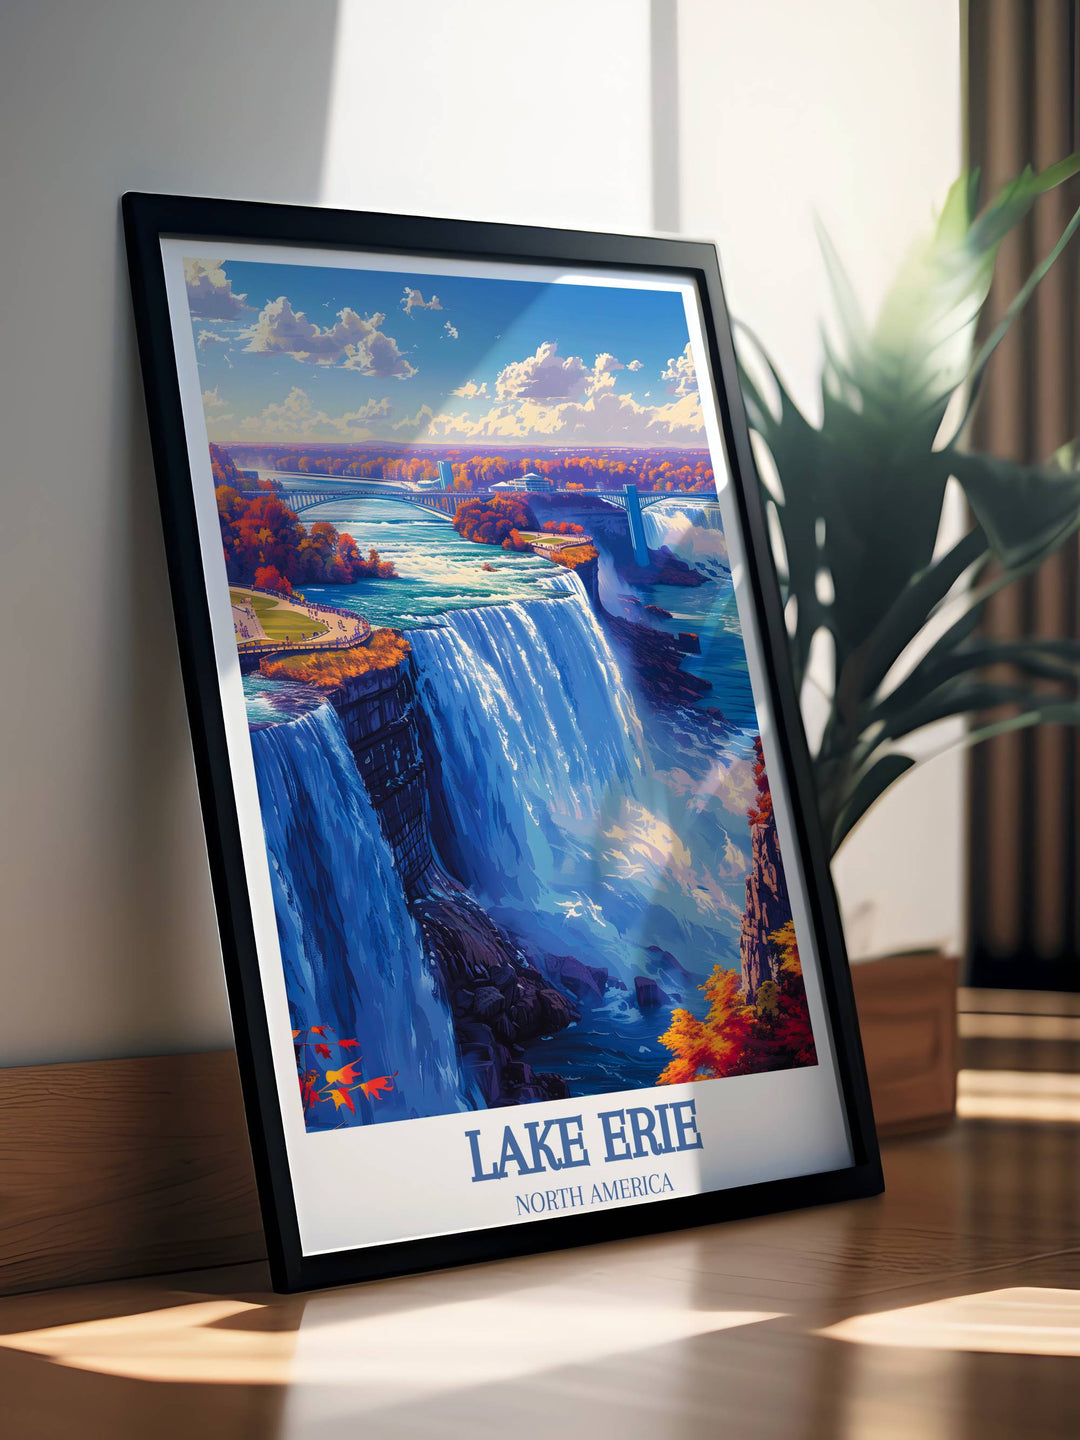 Birthday gifts made easy with a Lake Erie print, customize with personal details for a special touch.